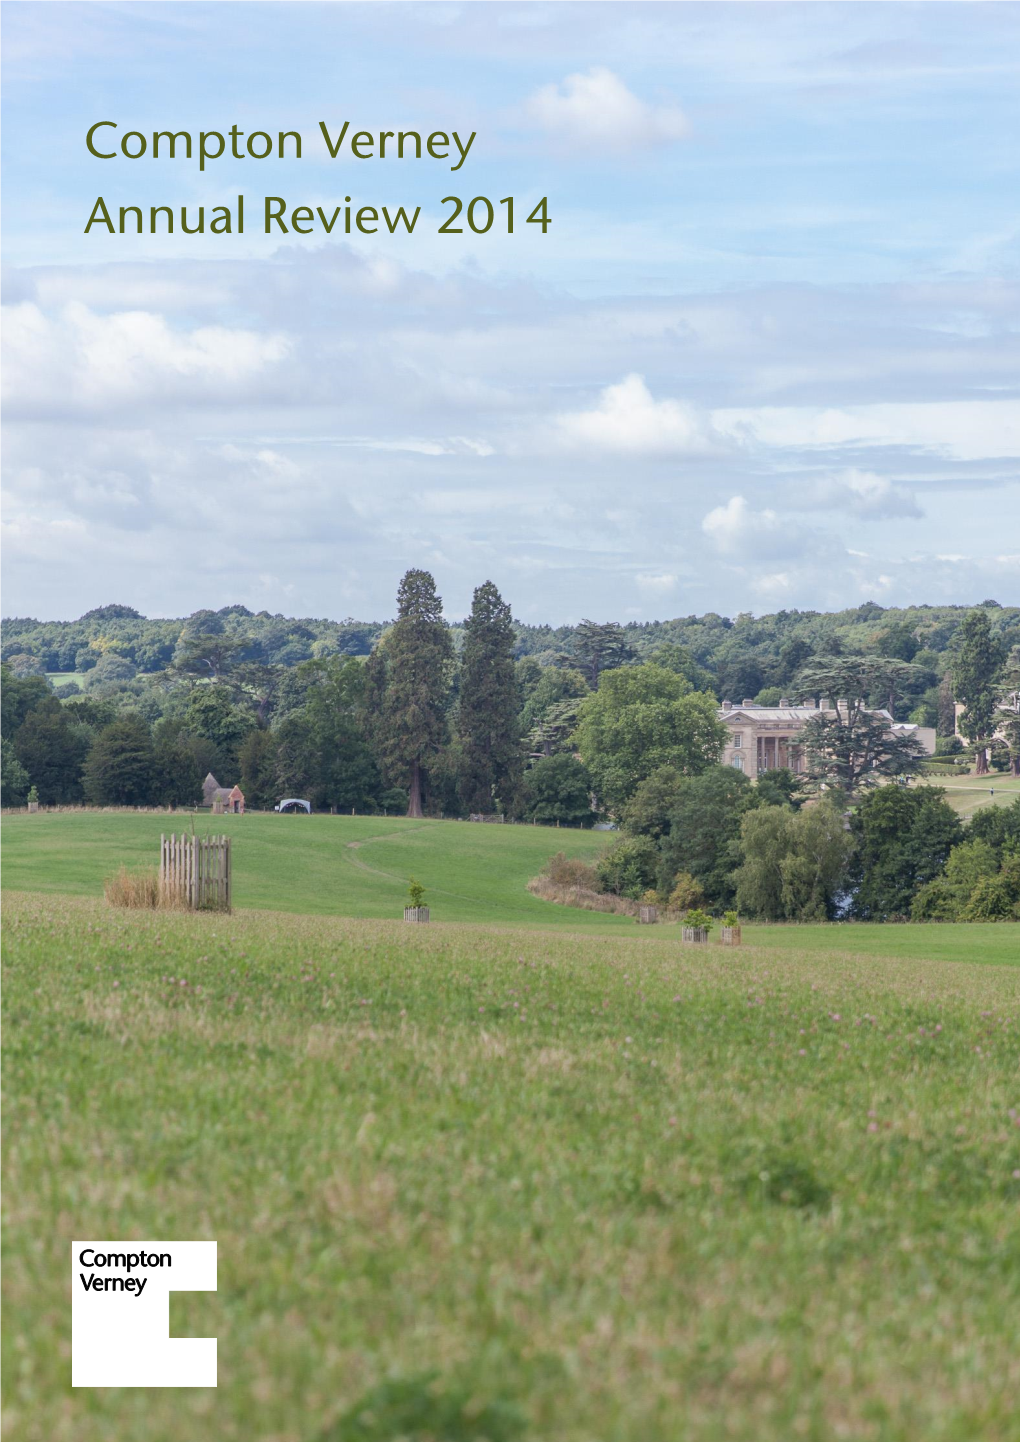 Compton Verney Annual Review 2014